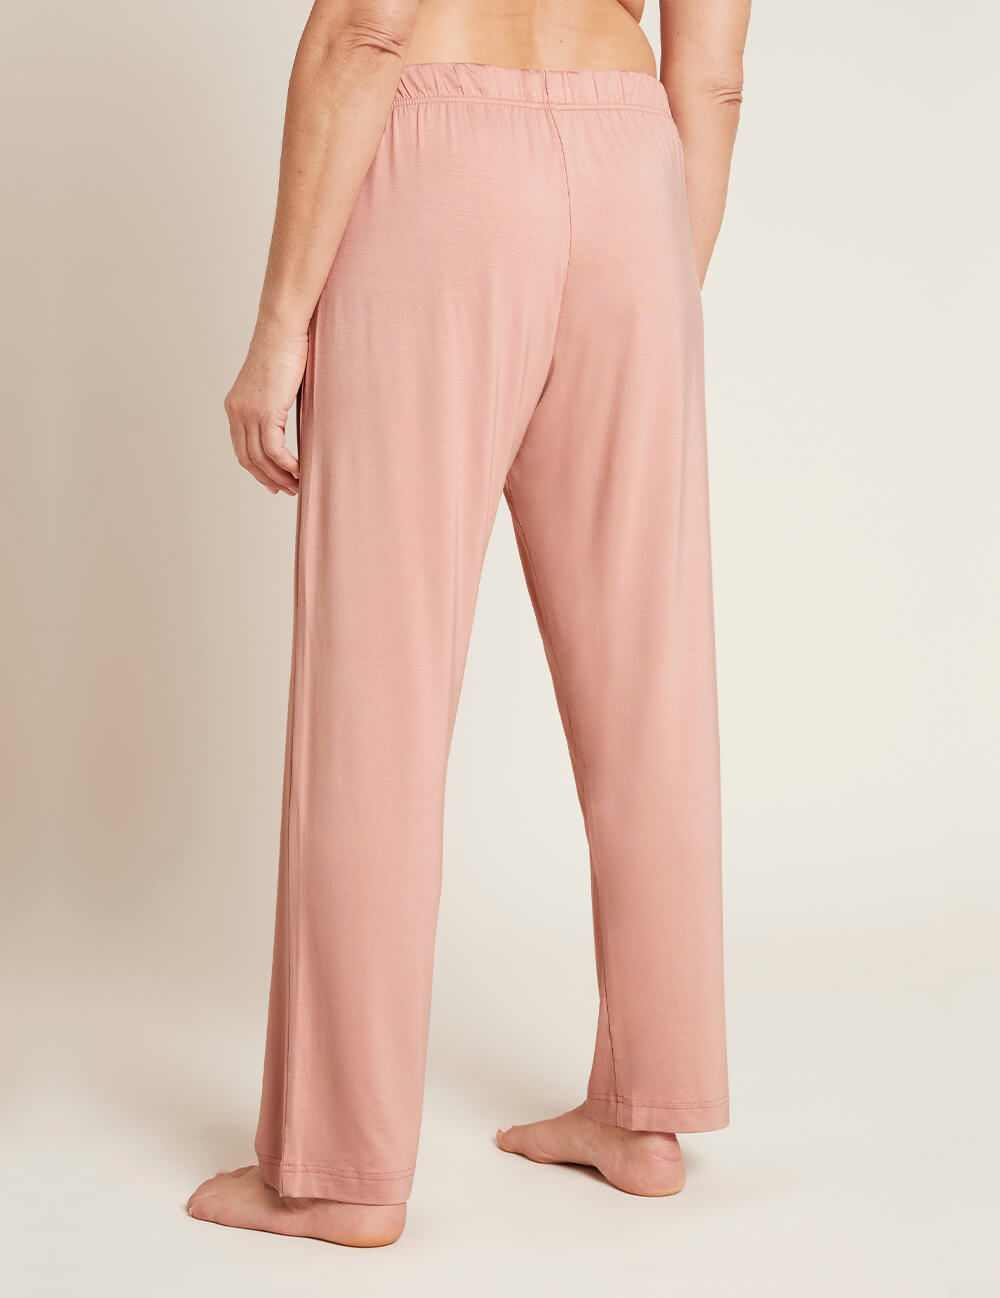 Boody Women's Goodnight Sleep Pant in Dusty Pink Back